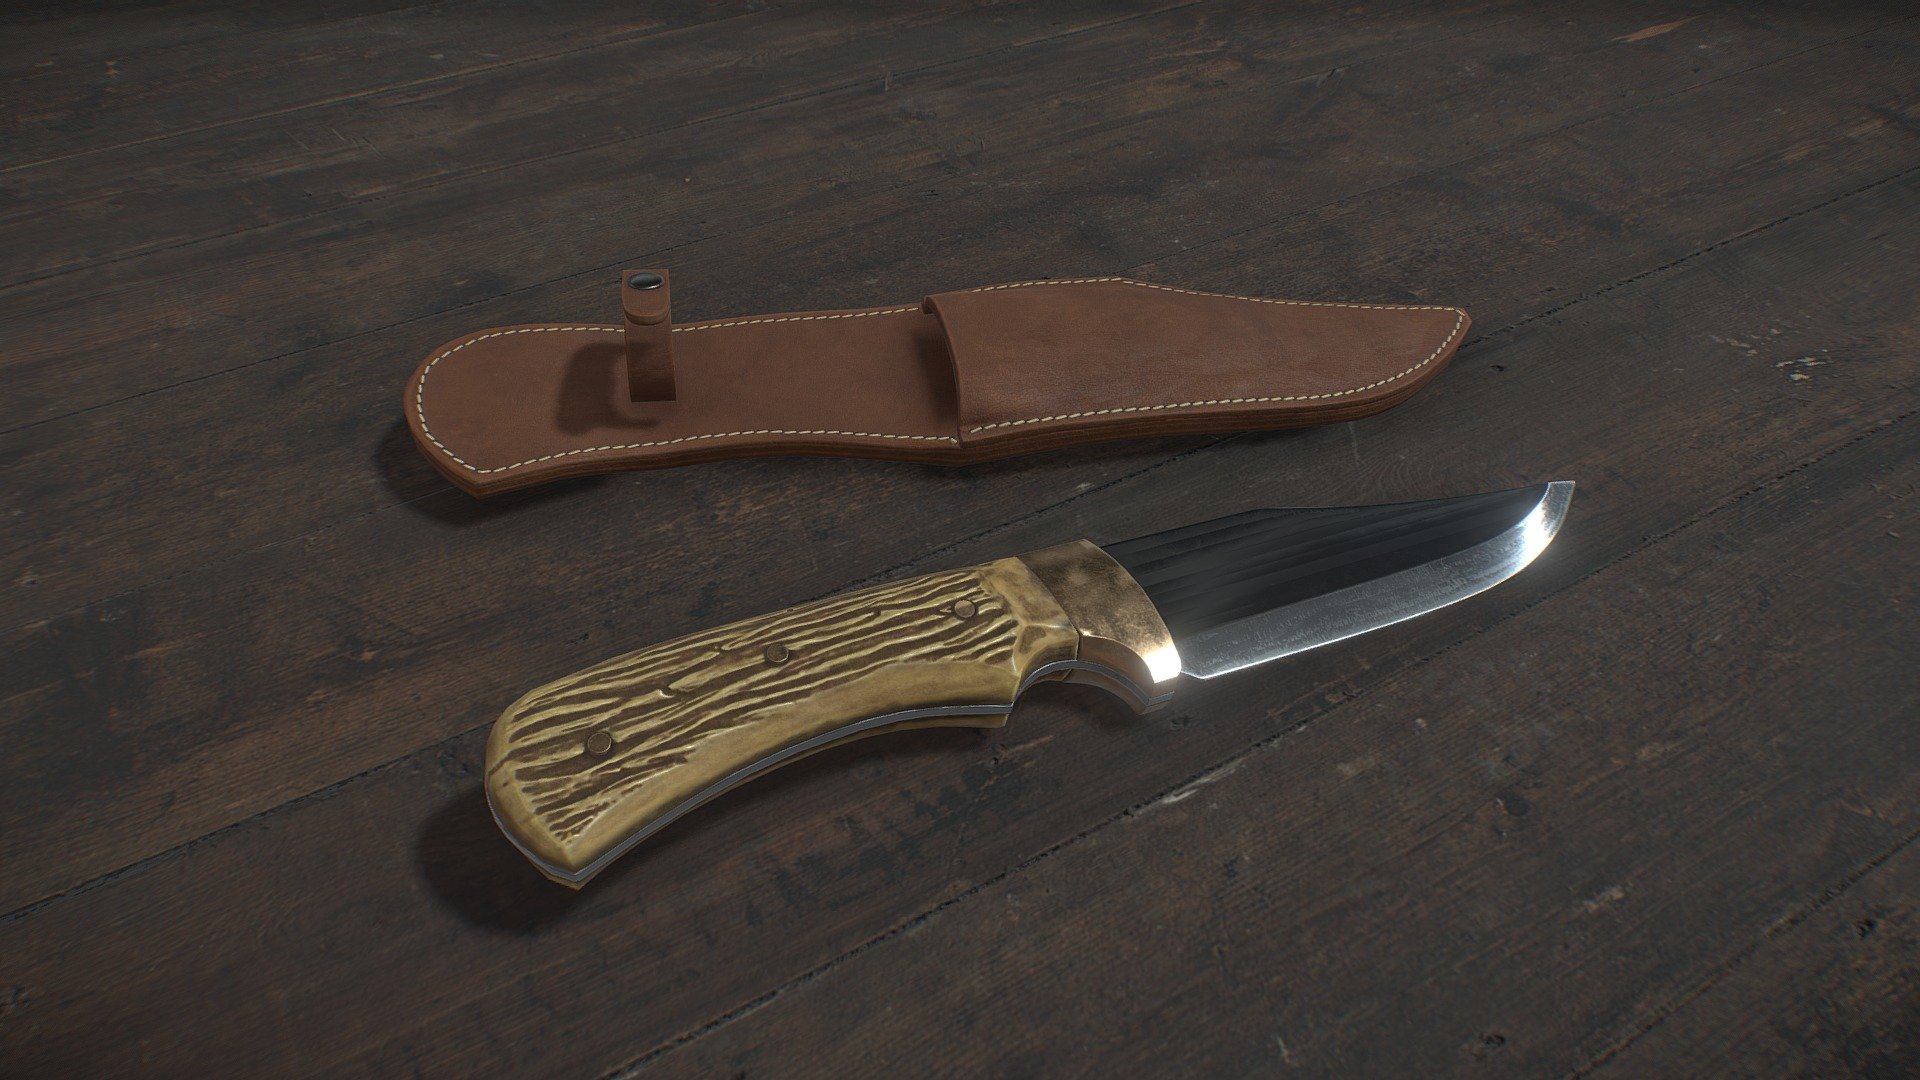 Hunting knife with holster. Game ready asset.
TRI count: 4902
2x4K texures for the knife and the holster 3d model